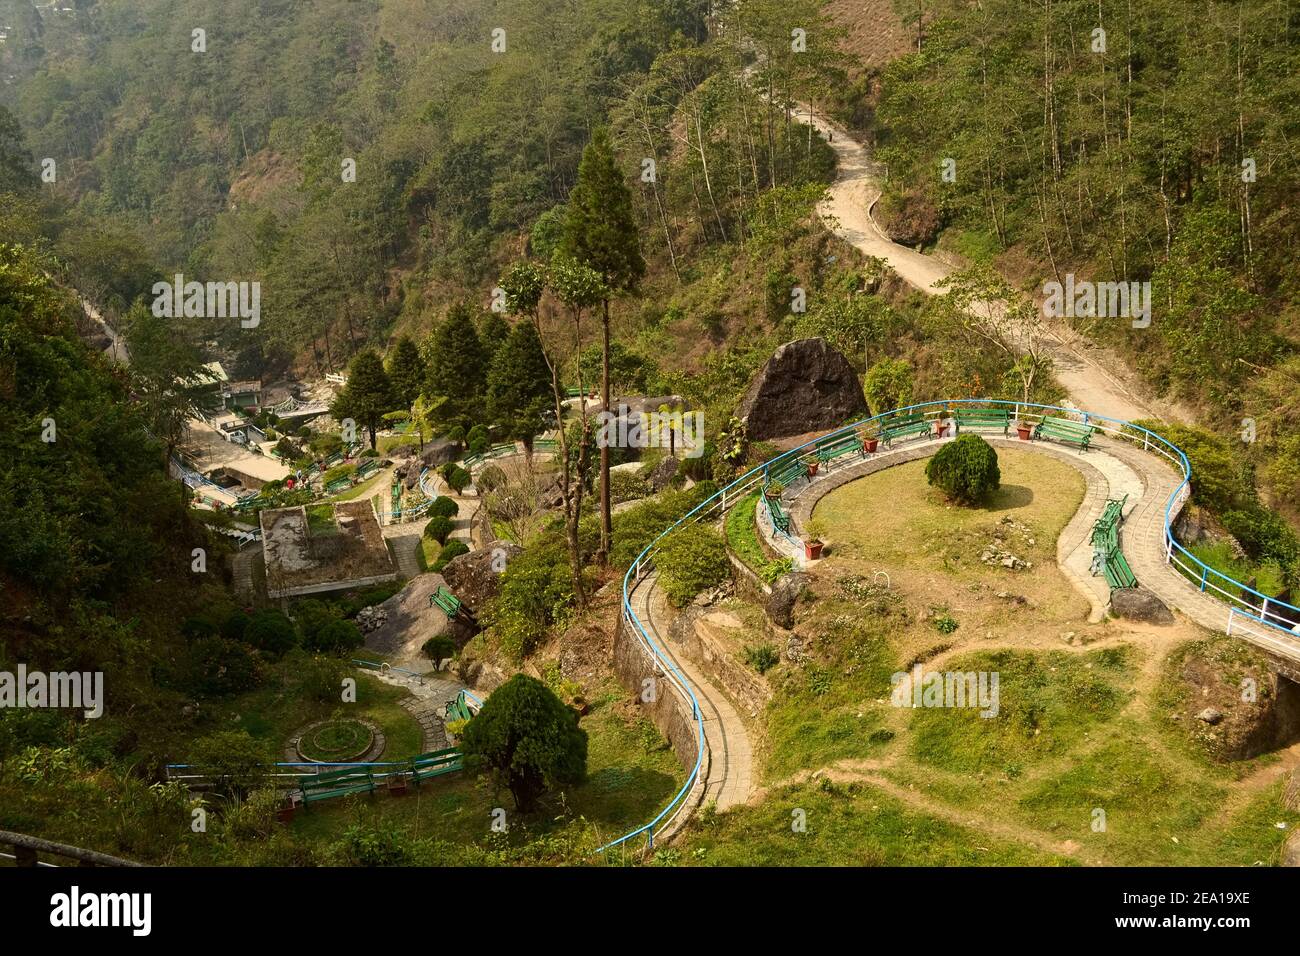 Top view of Barbotey Rock Garden in the mountains. Public natural park outdoors with curved walkways. Popular tourist attraction and indian landmark Stock Photo